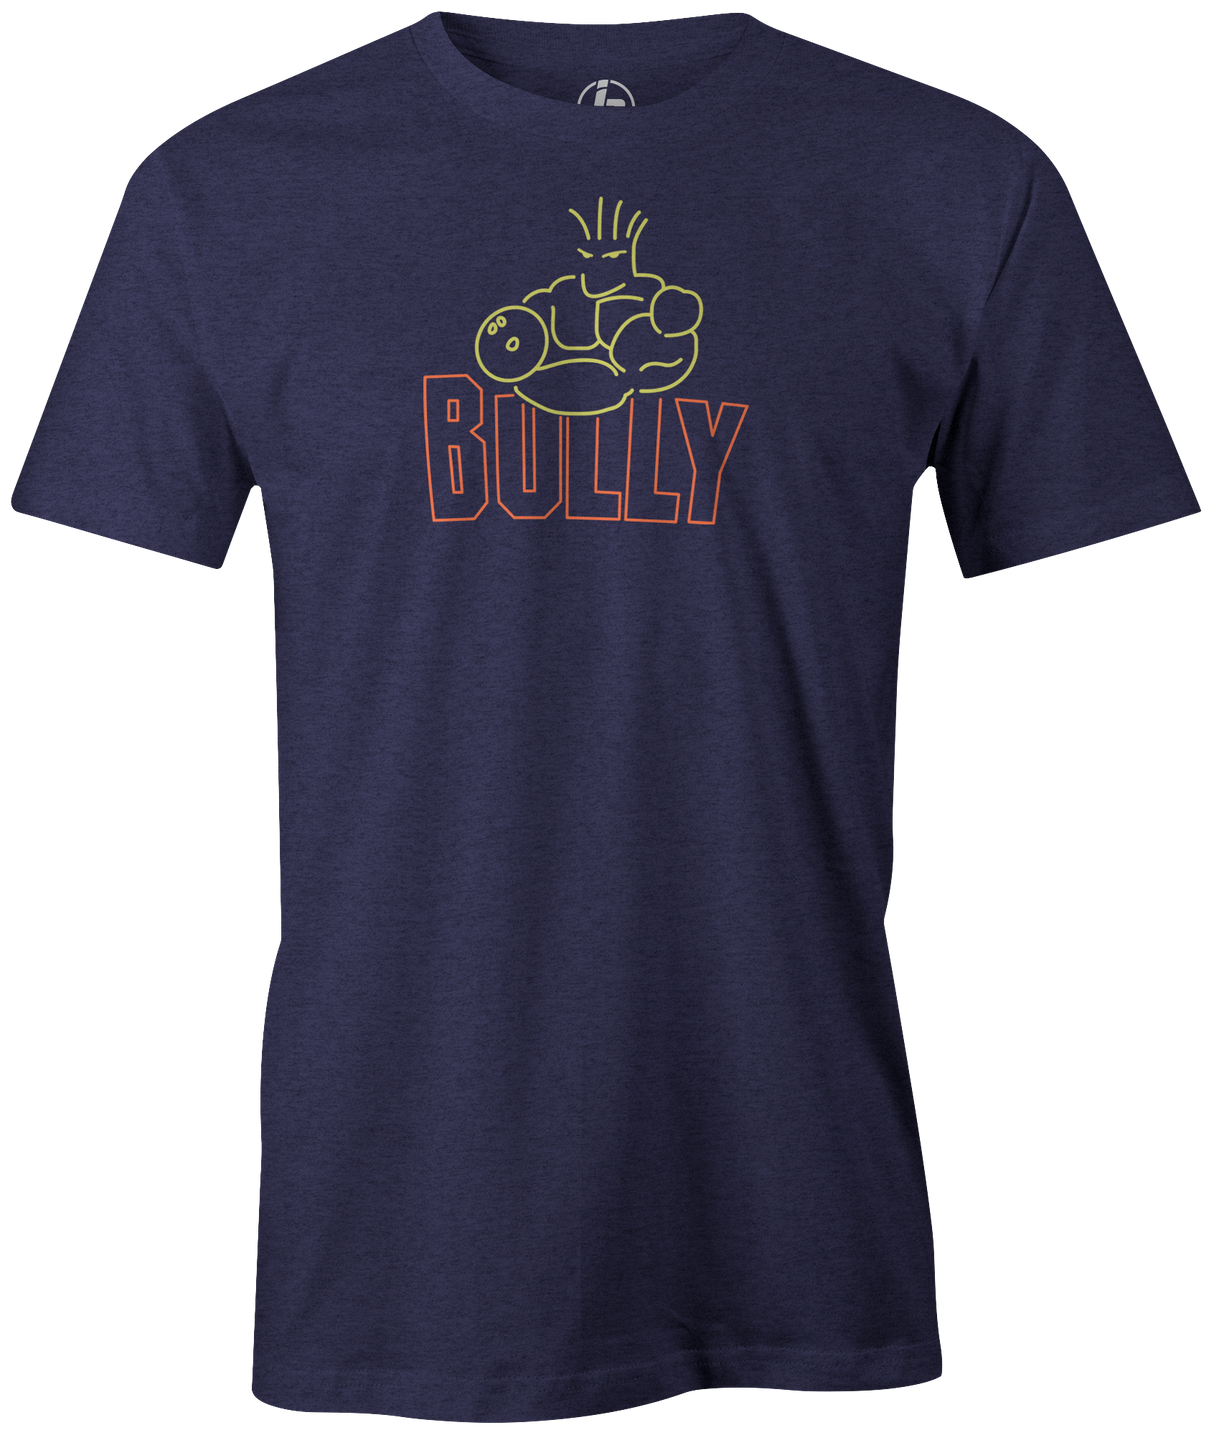 Re-live this old school ball with this Columbia 300 Bully Ball logo T-shirt! Retro, vintage, old school bowling ball. This is the perfect gift for any Columbia 300 fan or avid bowler. Grab this tee and be a SAVAGE! Tshirt, tee, tee-shirt, tee shirt, Pro shop. League bowling team shirt. PBA. PWBA. USBC. Junior Gold. Youth bowling. Tournament t-shirt. Men's. Bowling ball. savage life. Keven williams. Song.